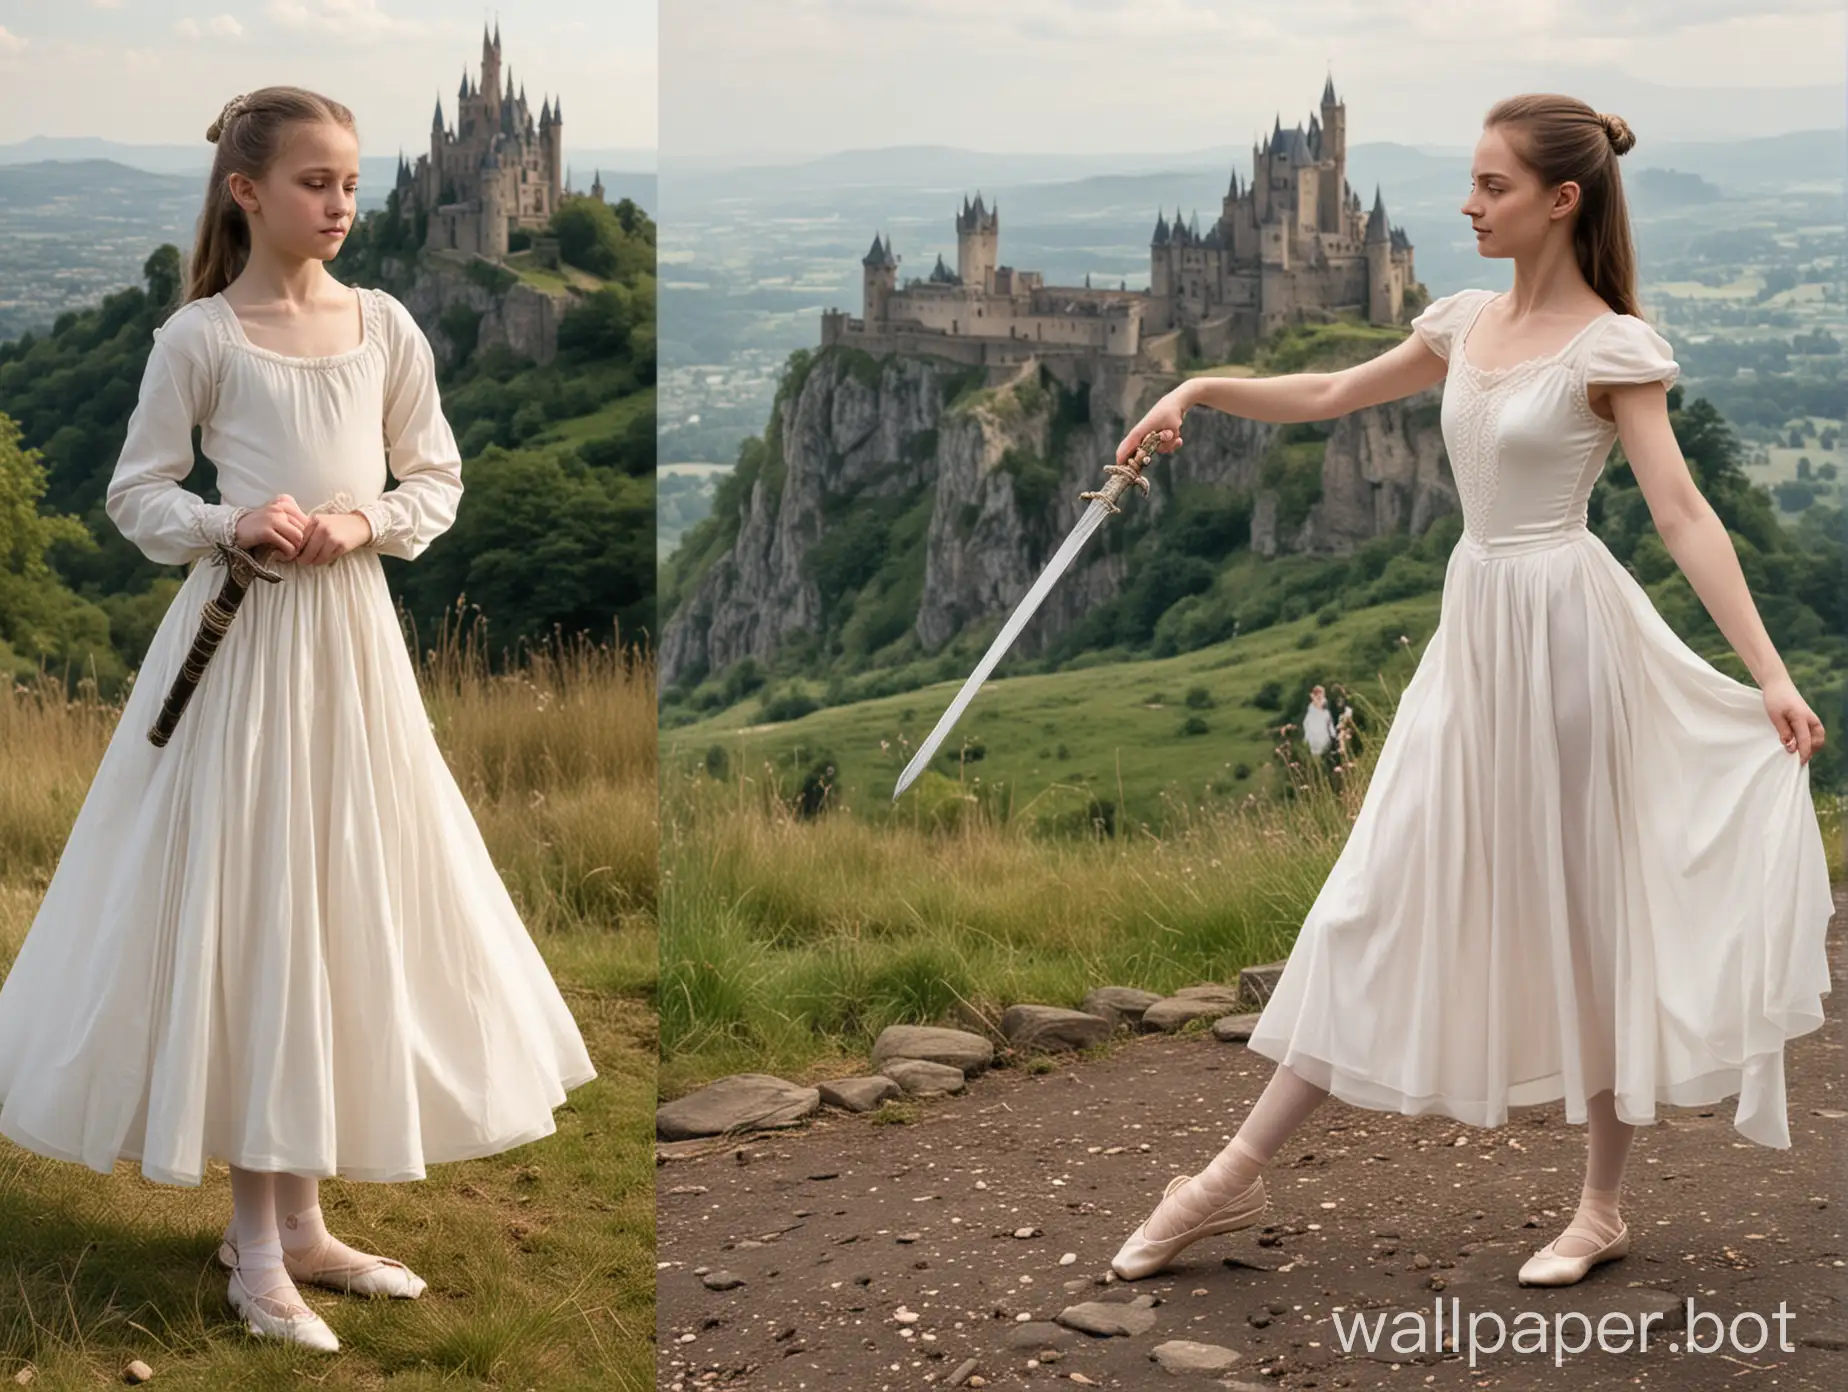 On the left is a Woman aged 25 in a long white gown, she is holding a sword. On the right is a girl aged 10 in ballet attire and pointe shoes. There is a castle on a hilltop in the distance.